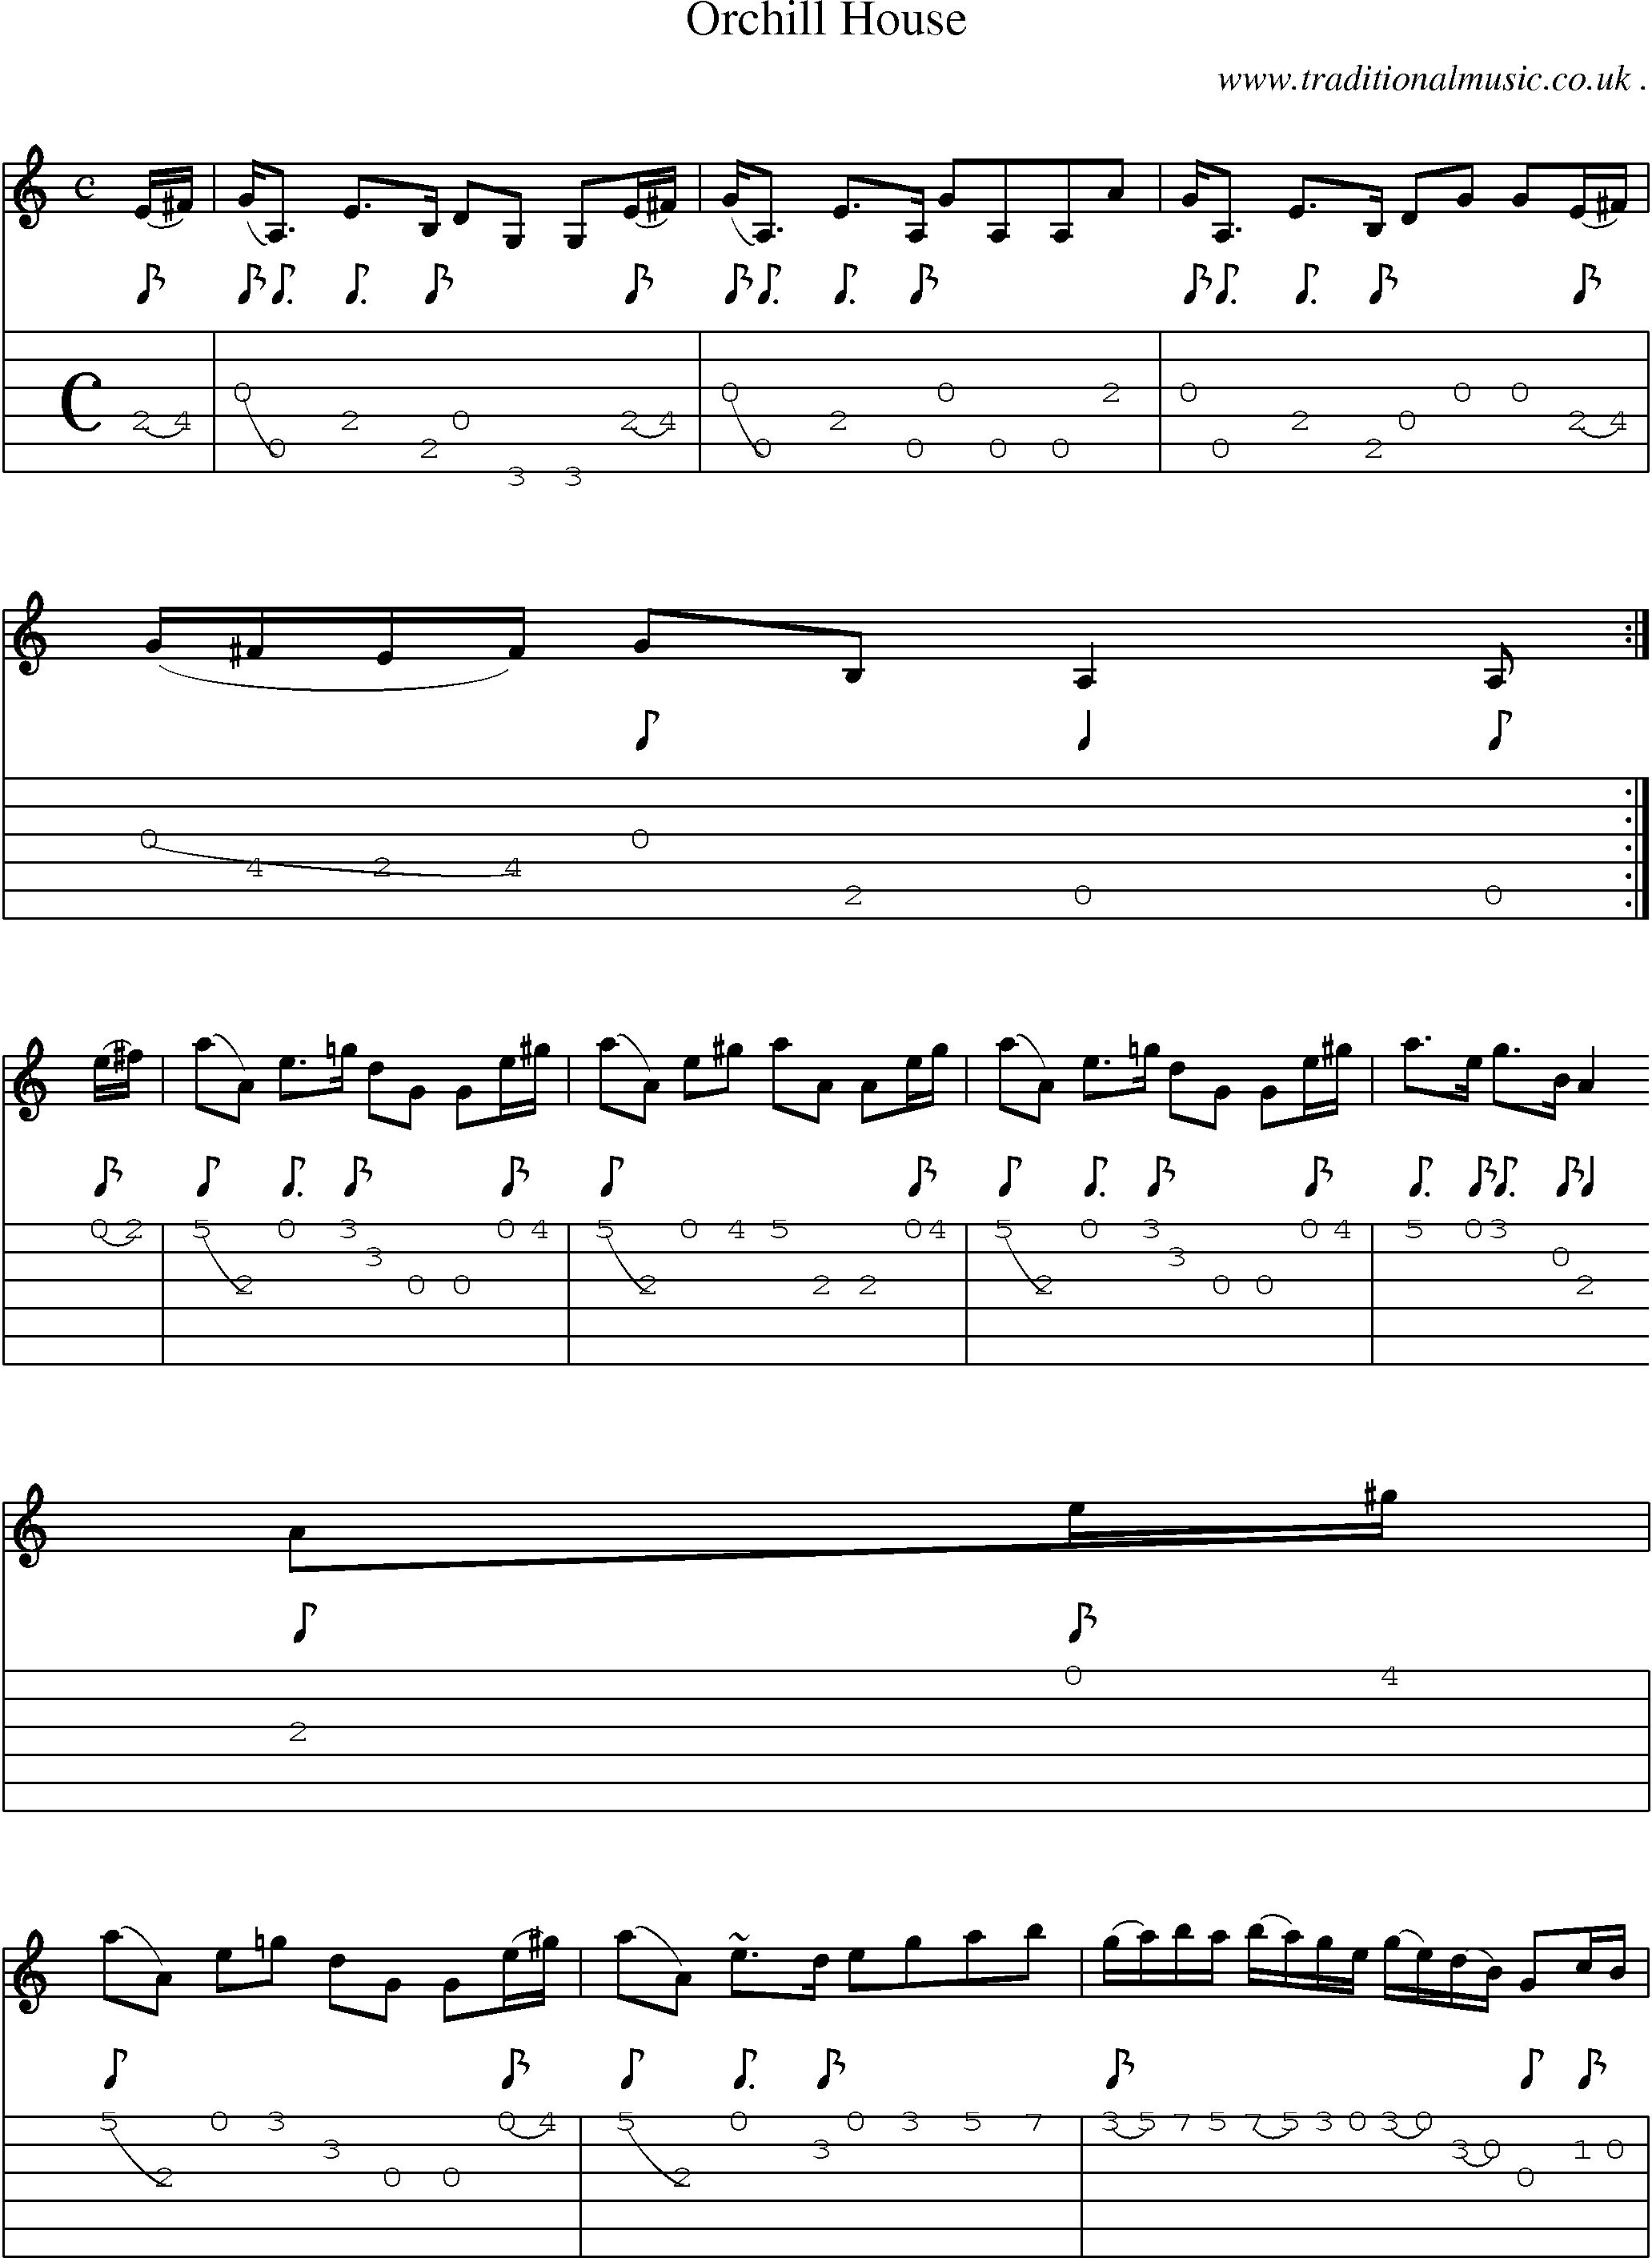 Sheet-music  score, Chords and Guitar Tabs for Orchill House